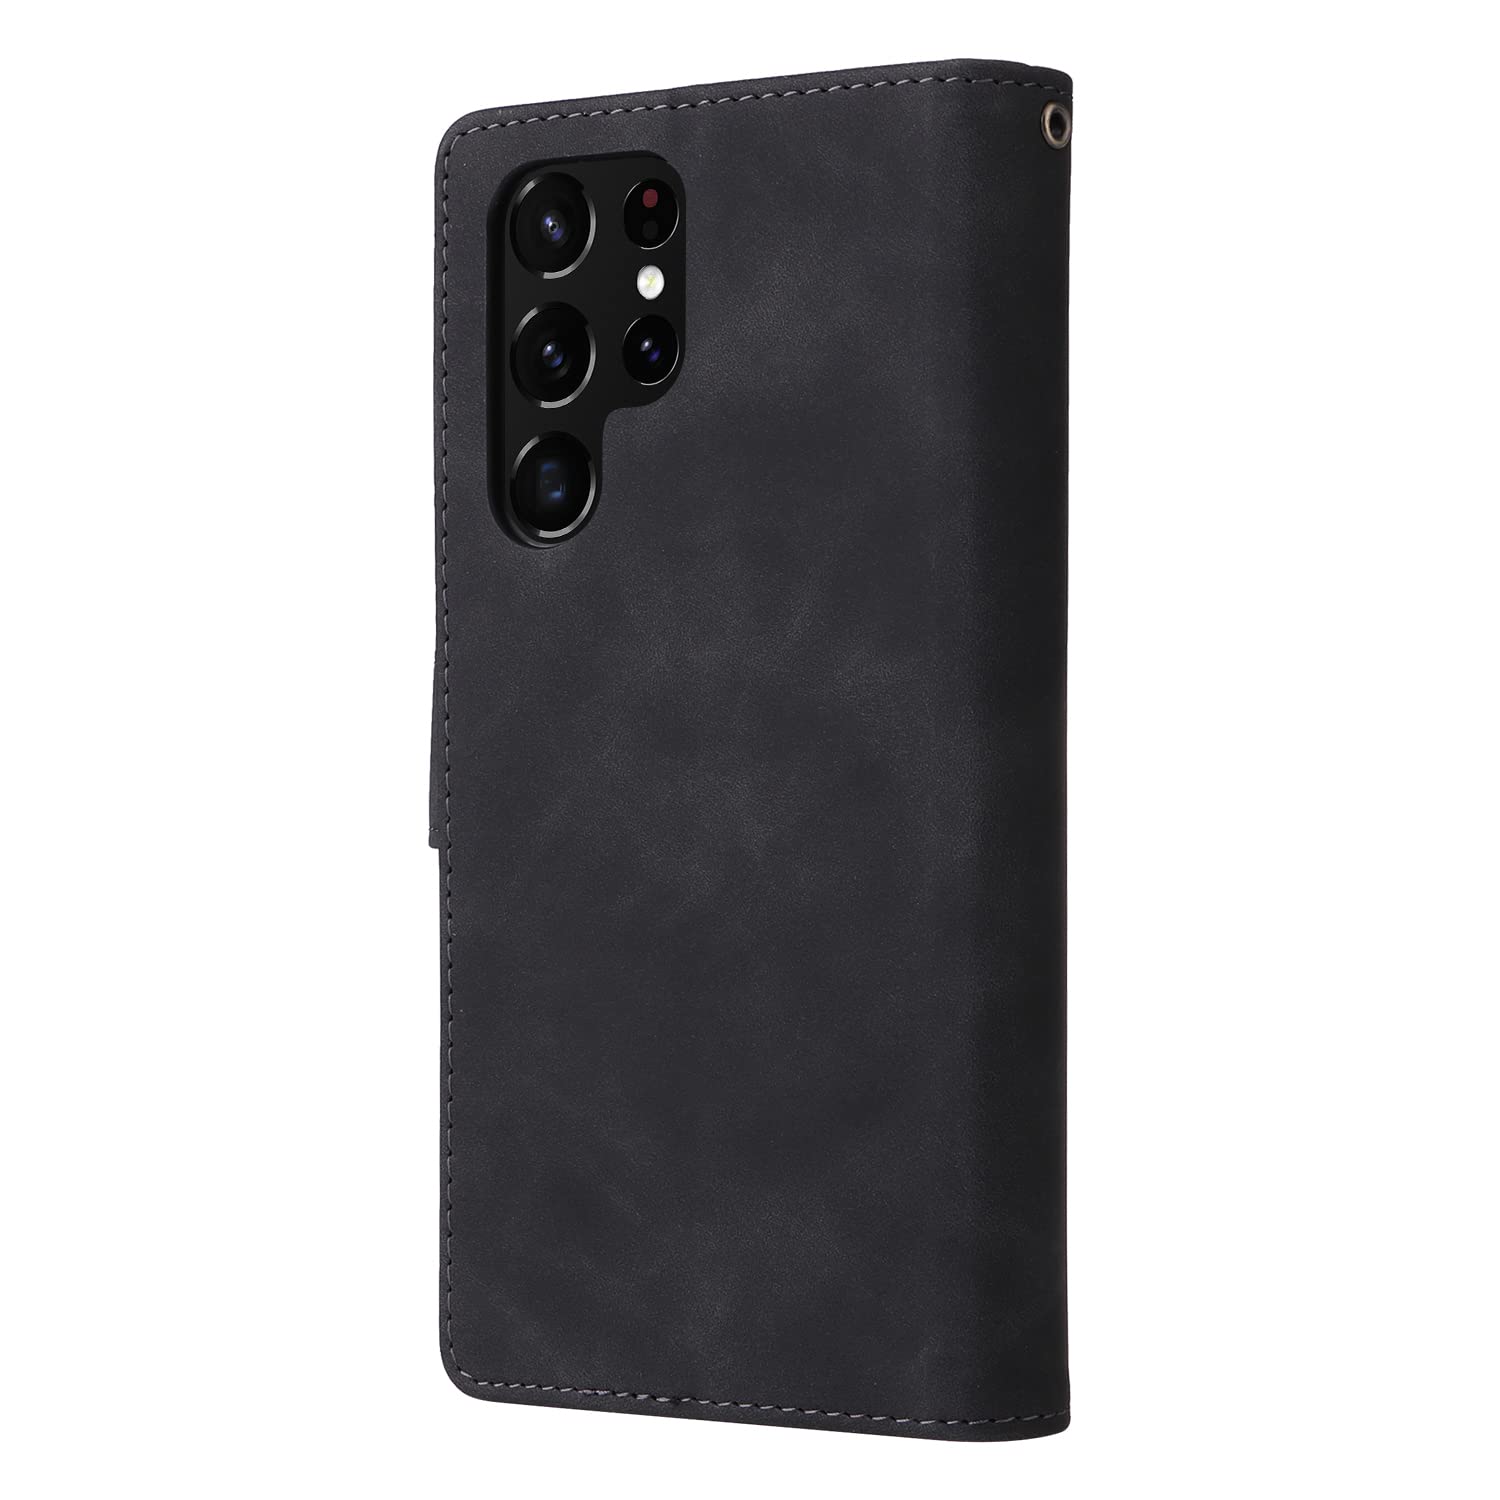 Caeouts Classic Clamshell Phone Case Black